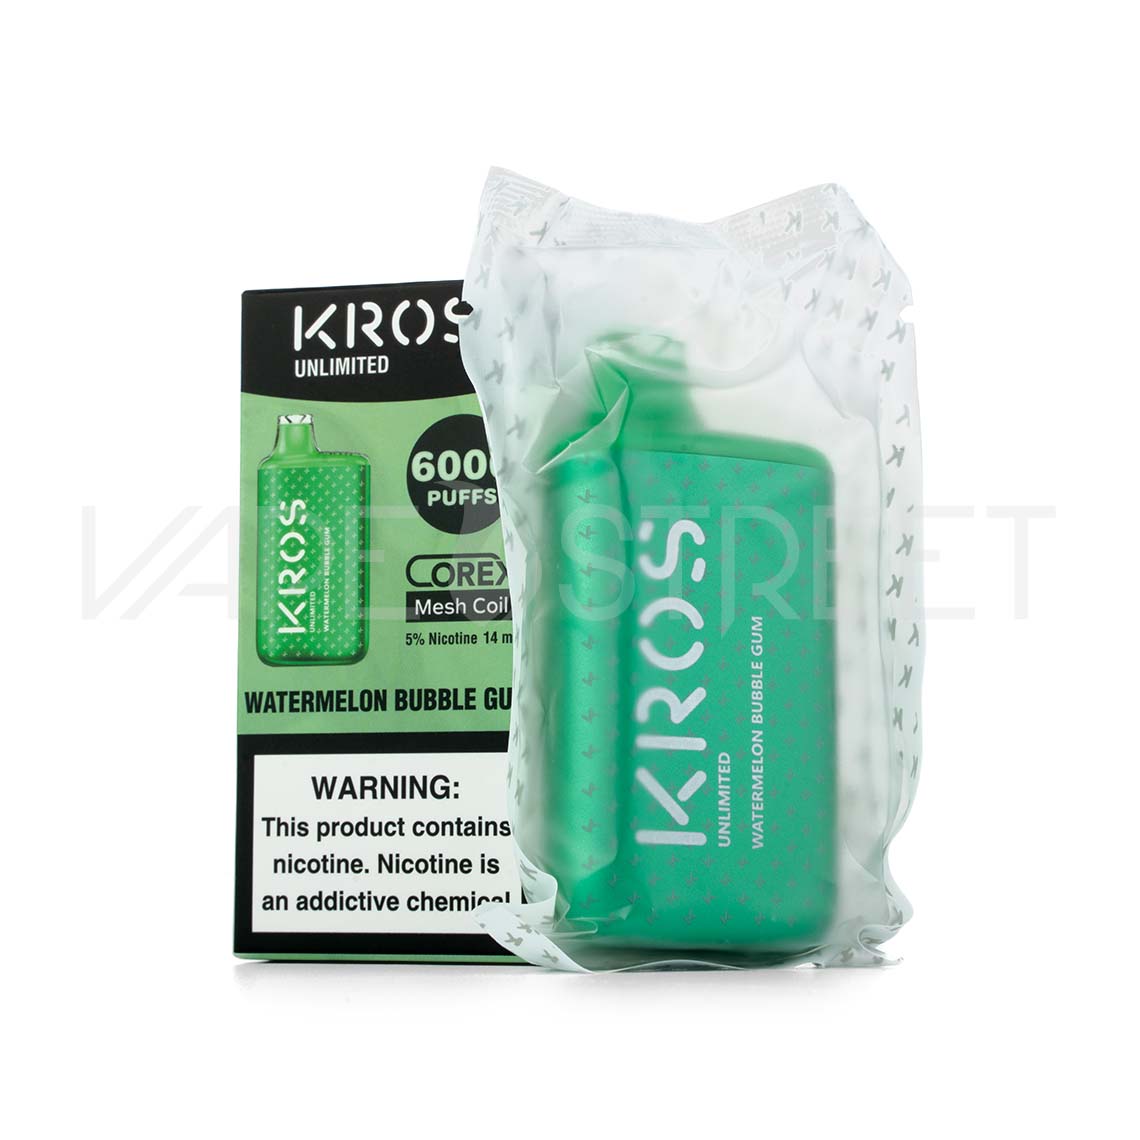 Kros Unlimited Disposable 6000 Puffs 5% Nicotine 14mL Juice Capacity